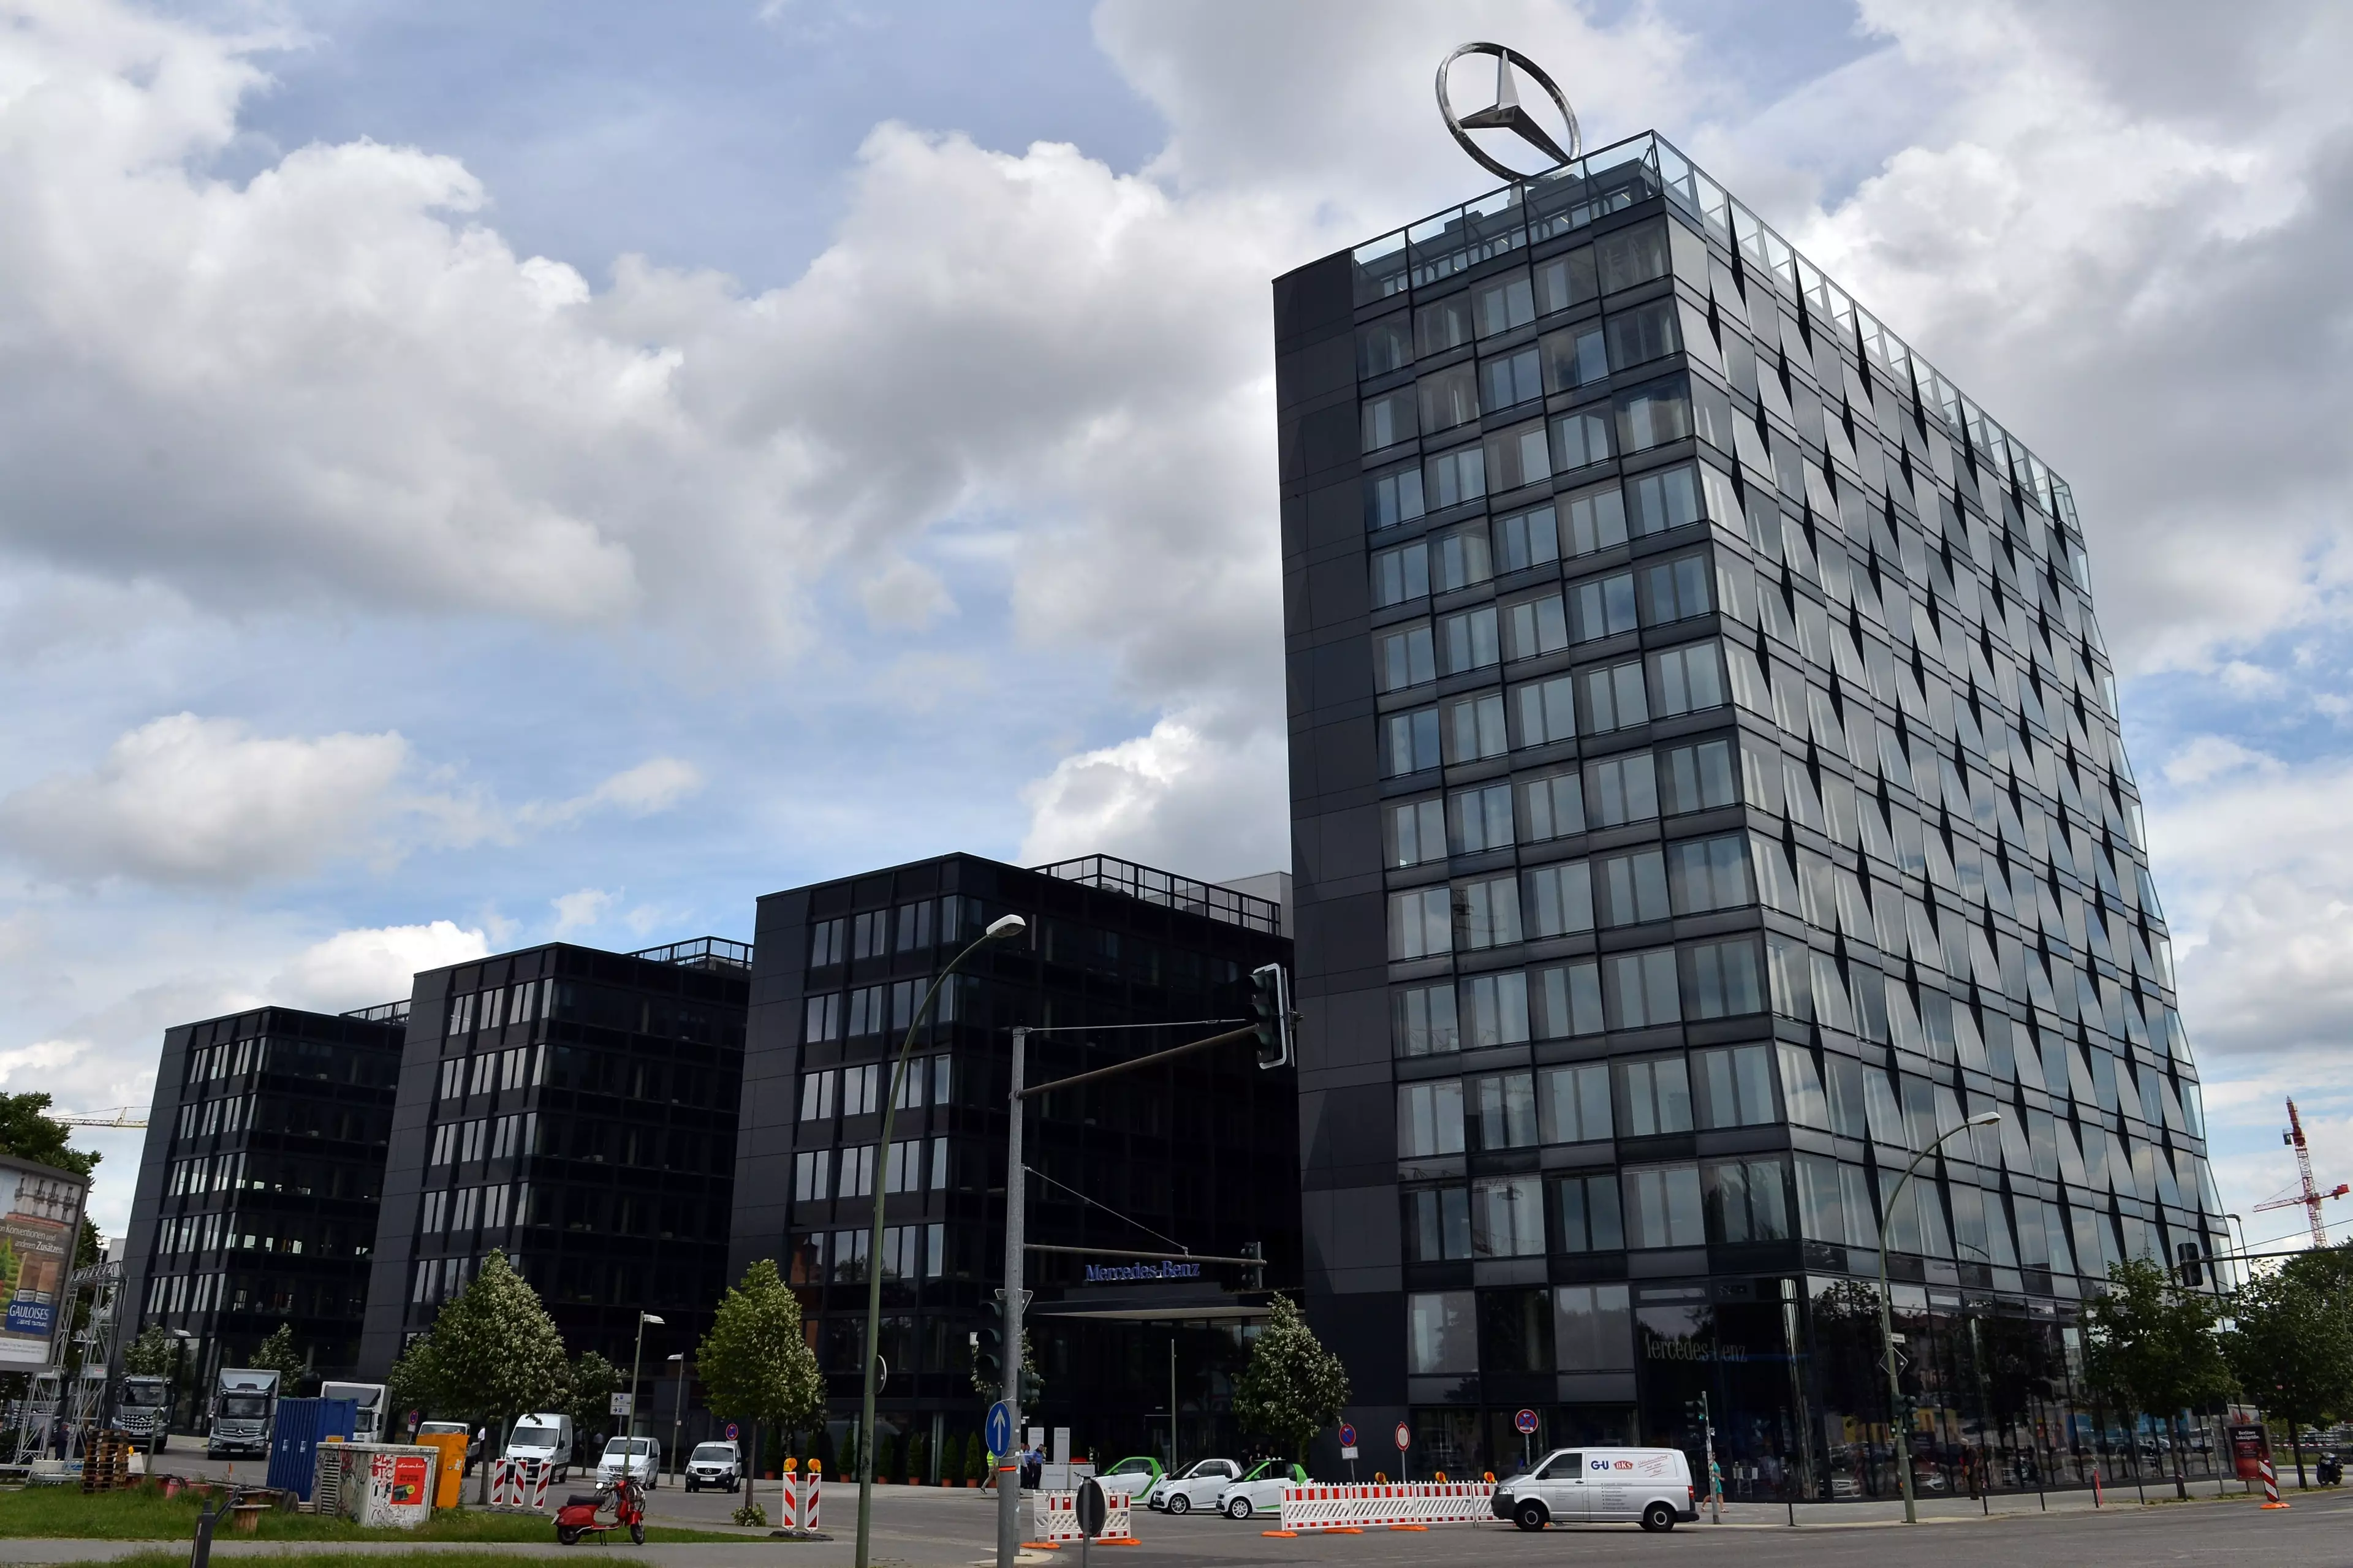 Mrs Huo flew to Mercedes-Benz's headquarters in Stuttgart, Germany, to complain.